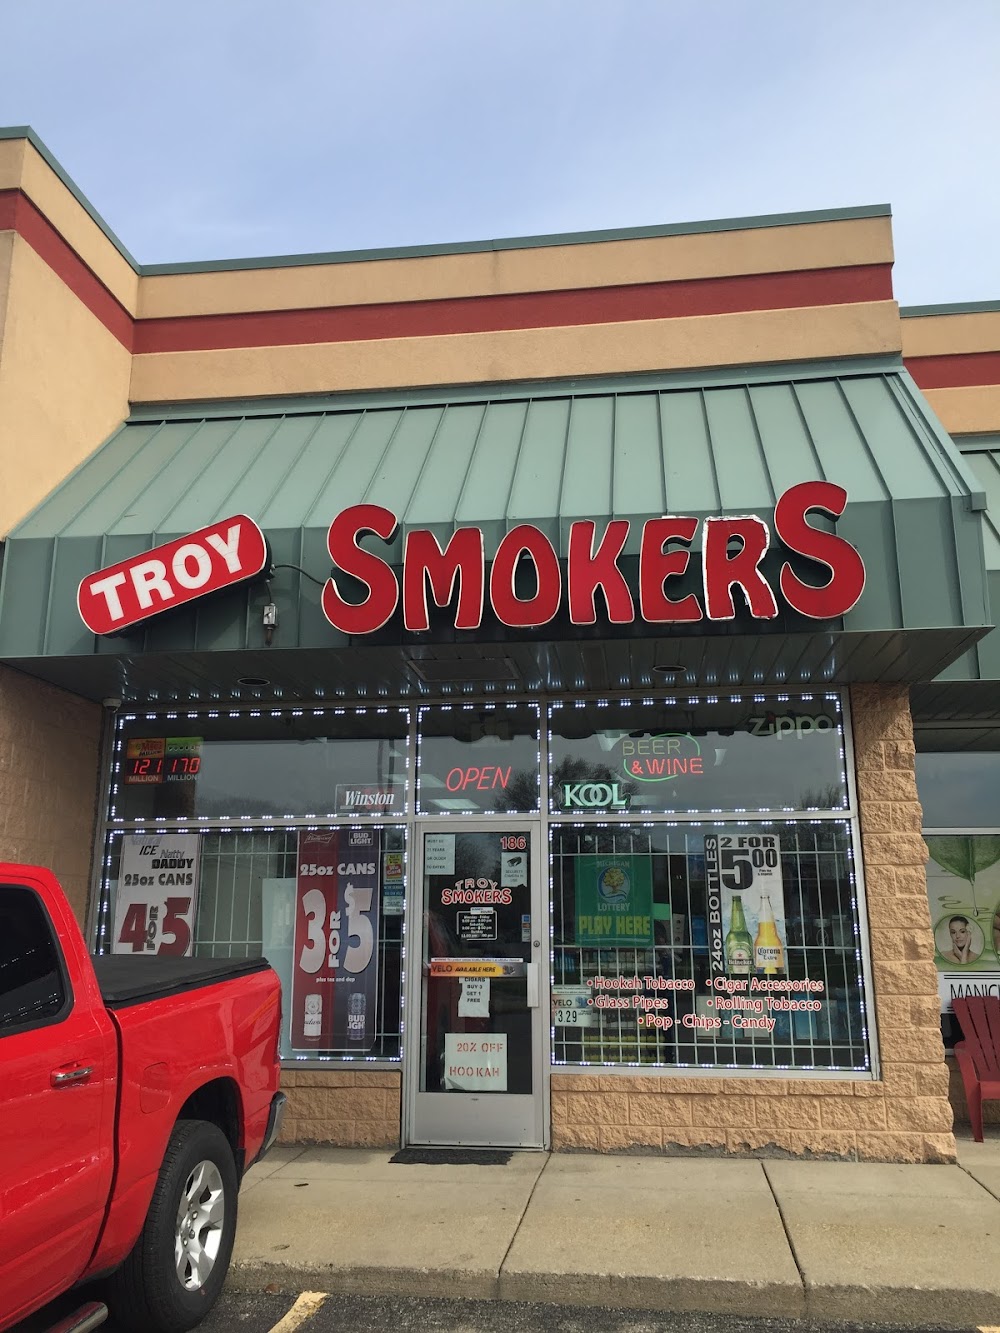 Troy Smokers